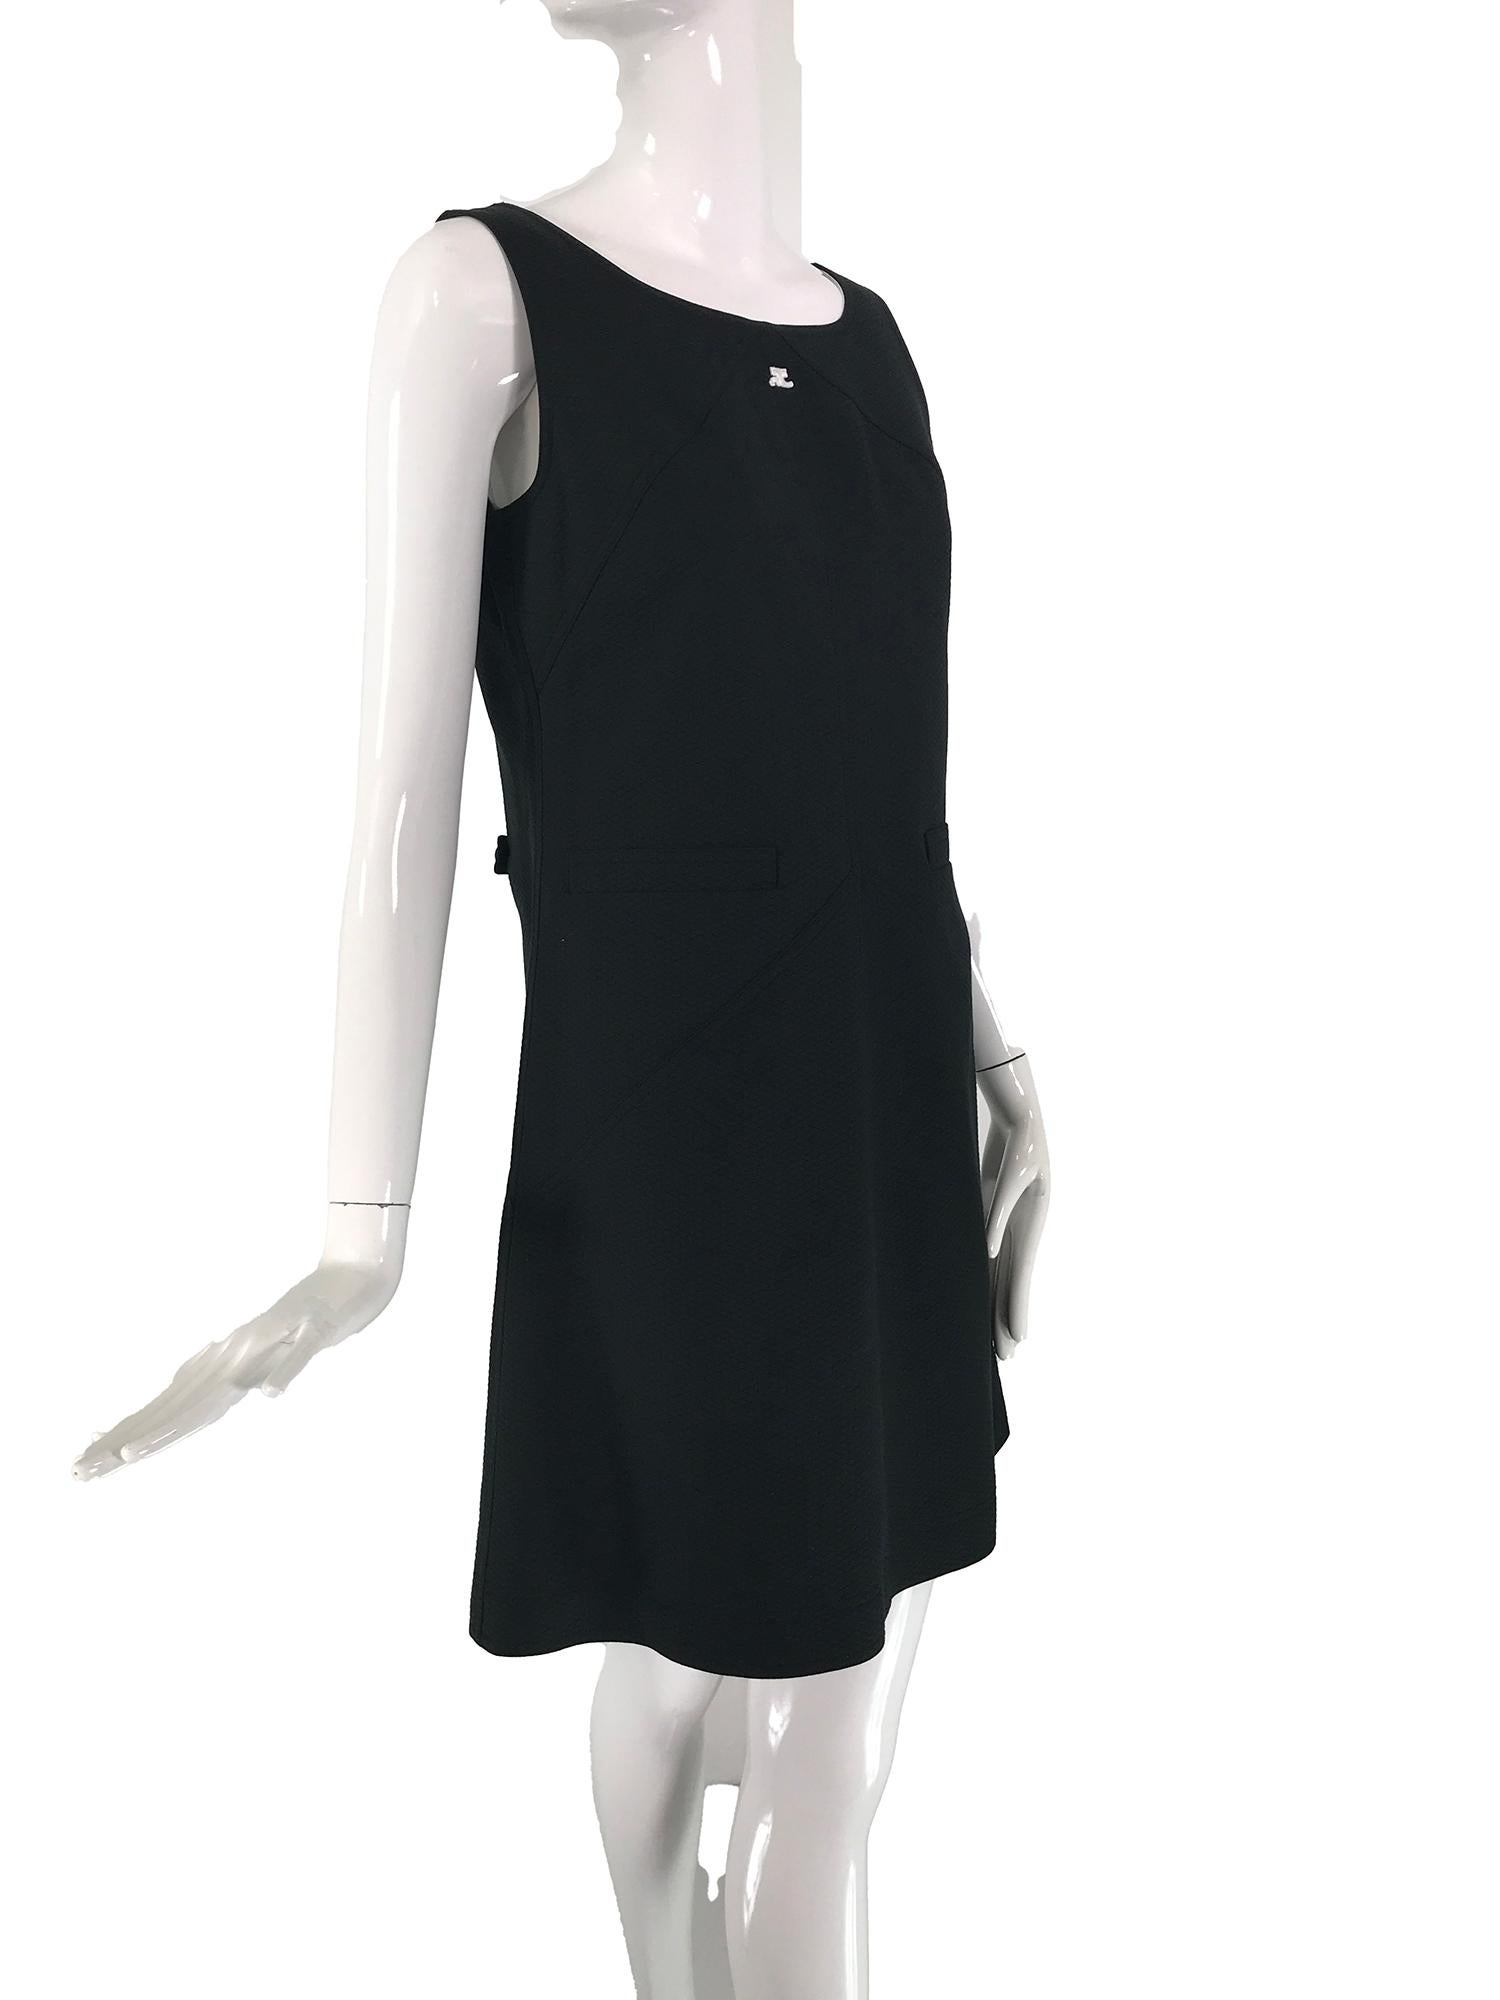 Courreges 100% black diamond design cotton A line sleeveless shift dress unworn with Bergdorf Goodmans tag, marked size 40. Classic Courreges style A line dress pieced and seamed, beasom hip front pockets (unpicked). The dress closes at the side